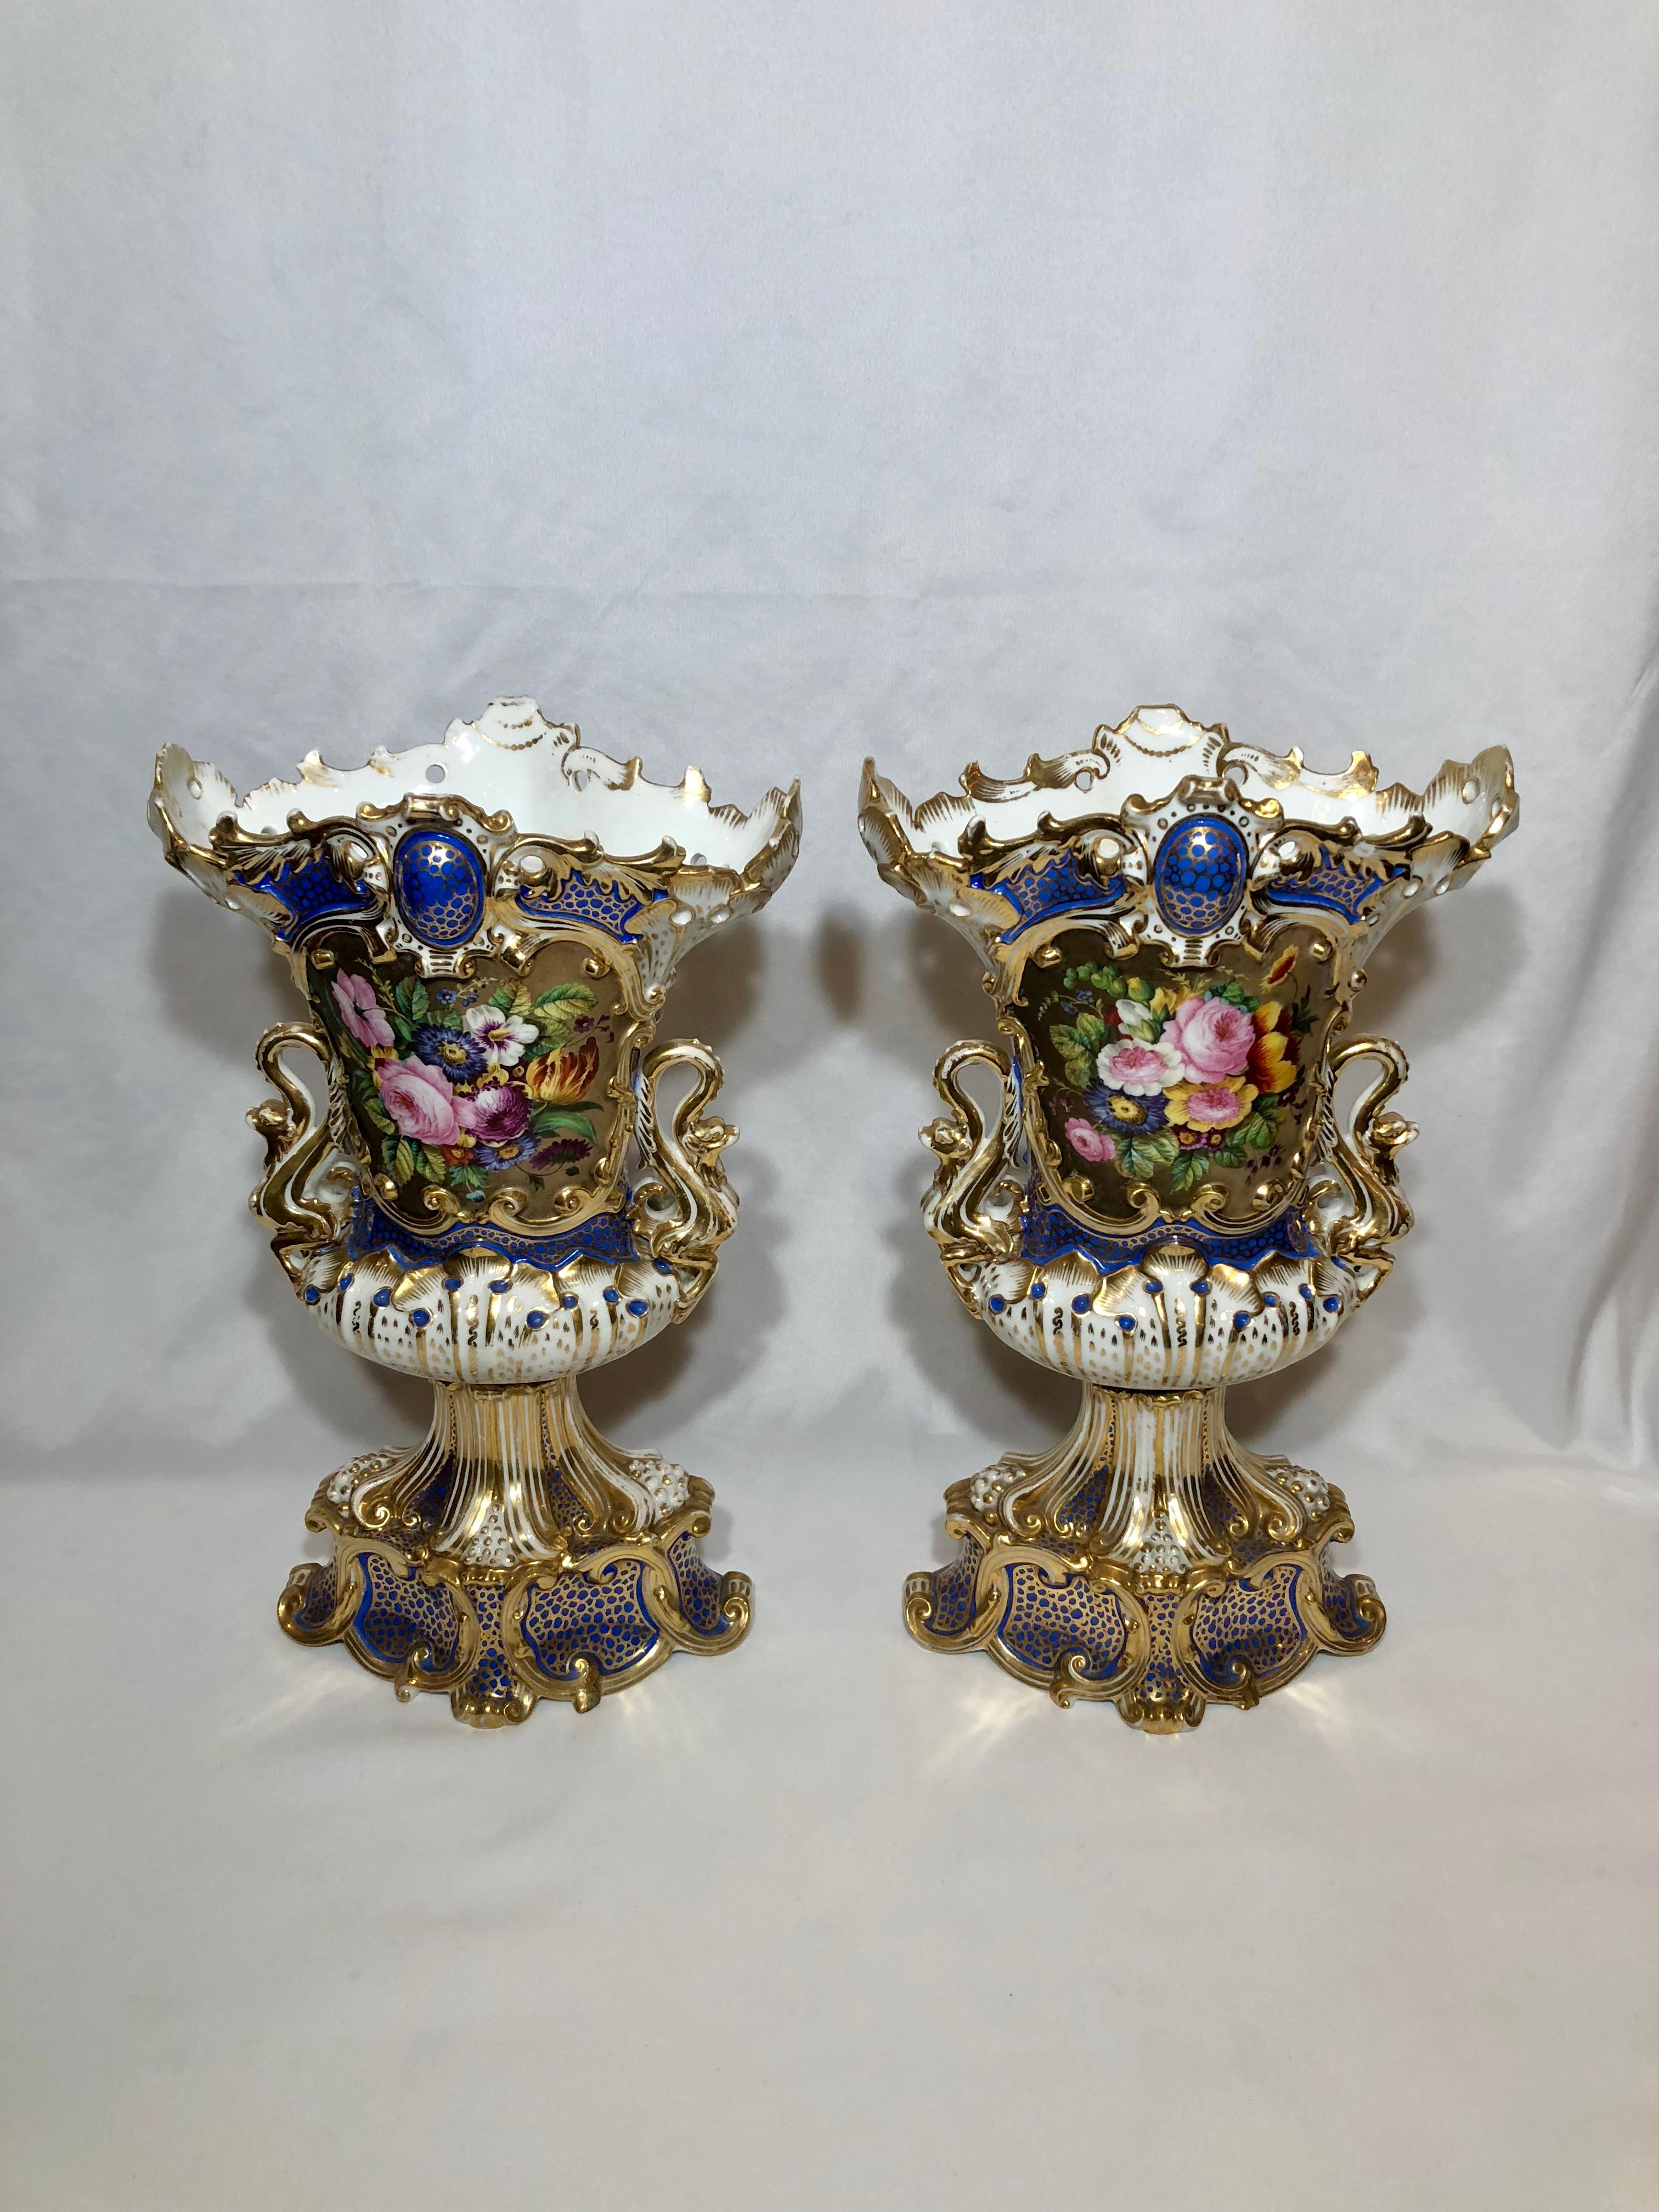 Pair of antique French old Paris hand-painted vases Jacob Petit marks. These are exquisite and beautifully rendered. 